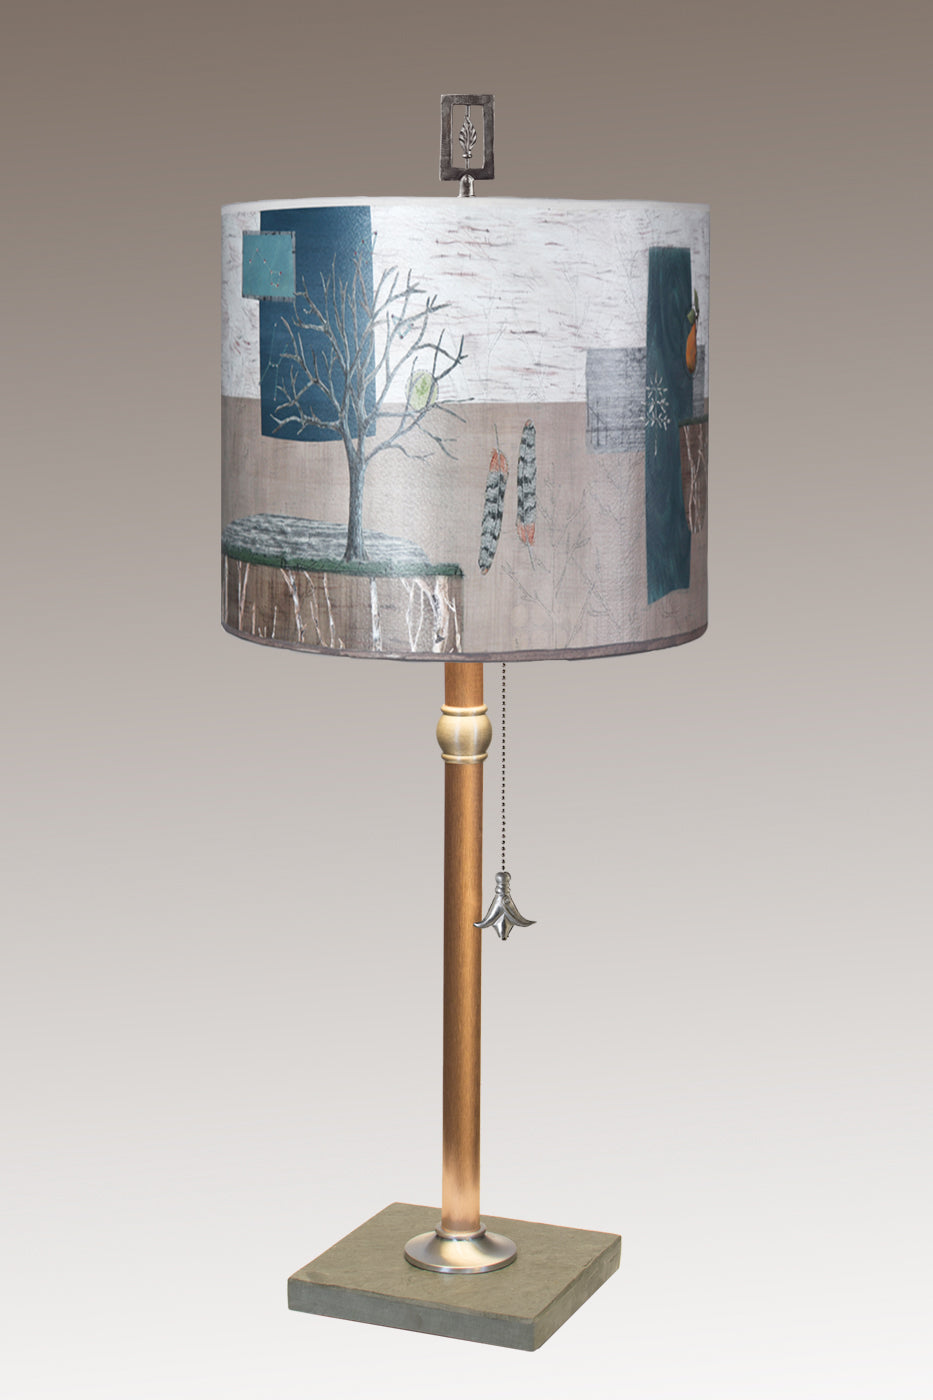 Janna Ugone & Co Table Lamps Copper Table Lamp with Medium Drum Shade in Wander in Drift